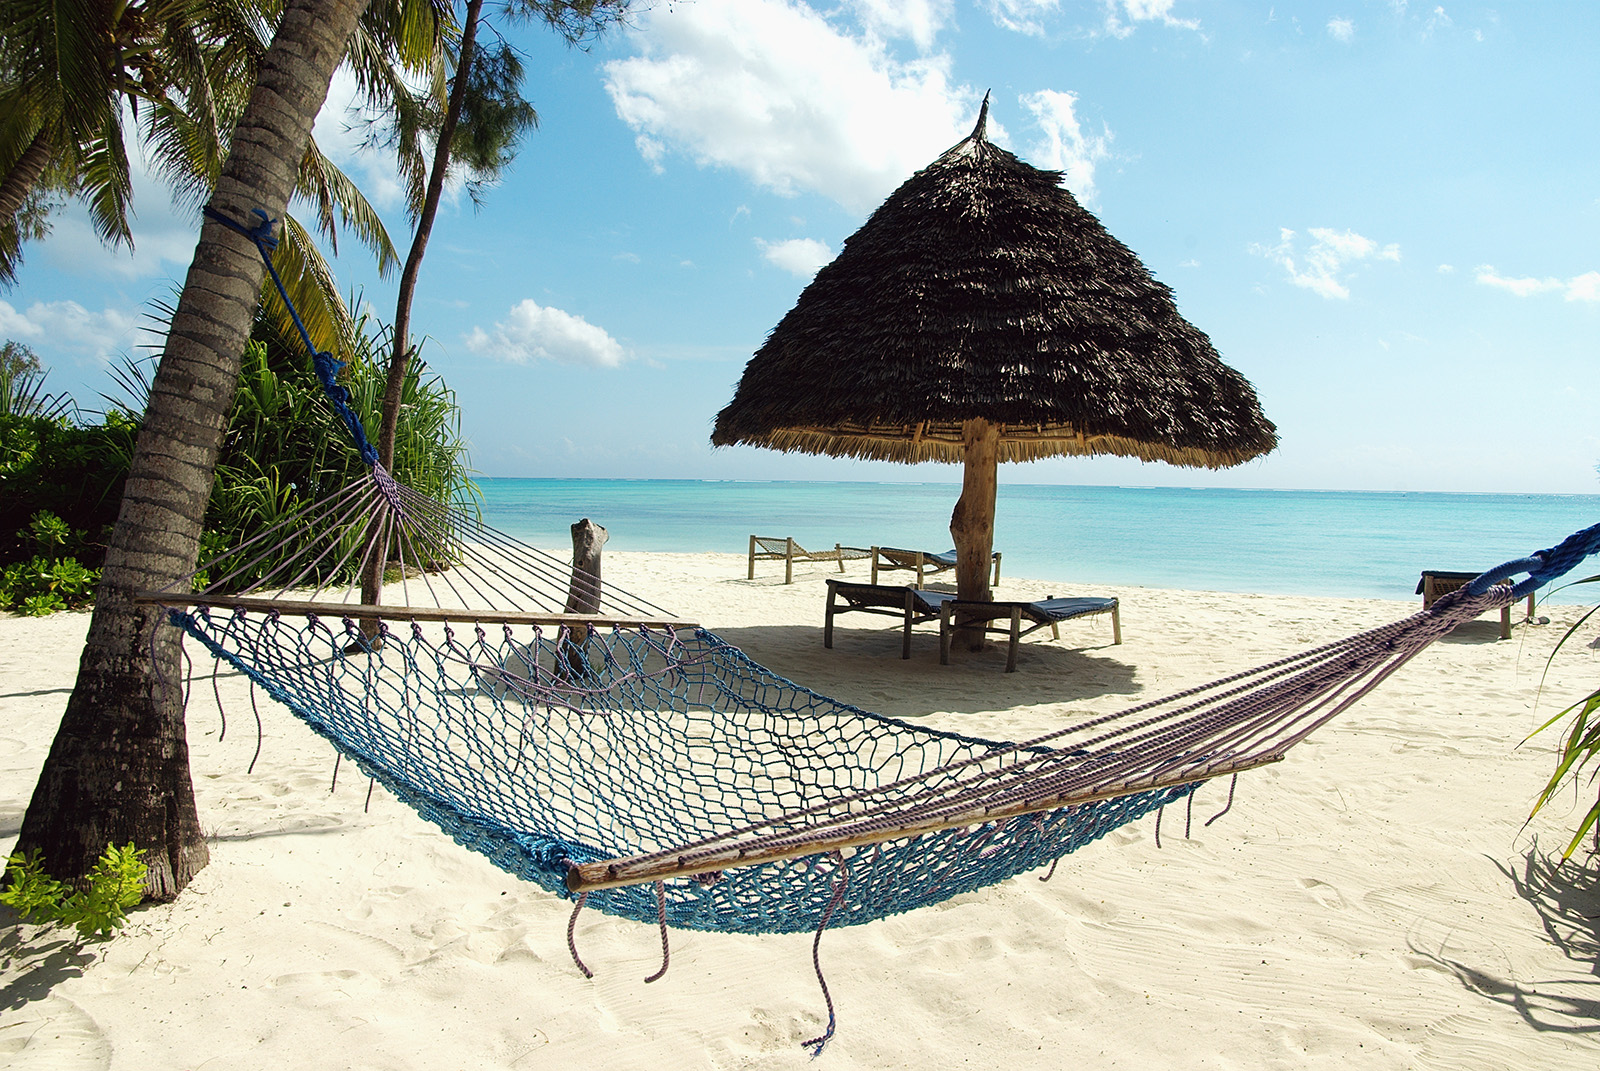 Zanzibar beach holidays are fully personalized to provide the customer with their own dream vacation of a lifetime.